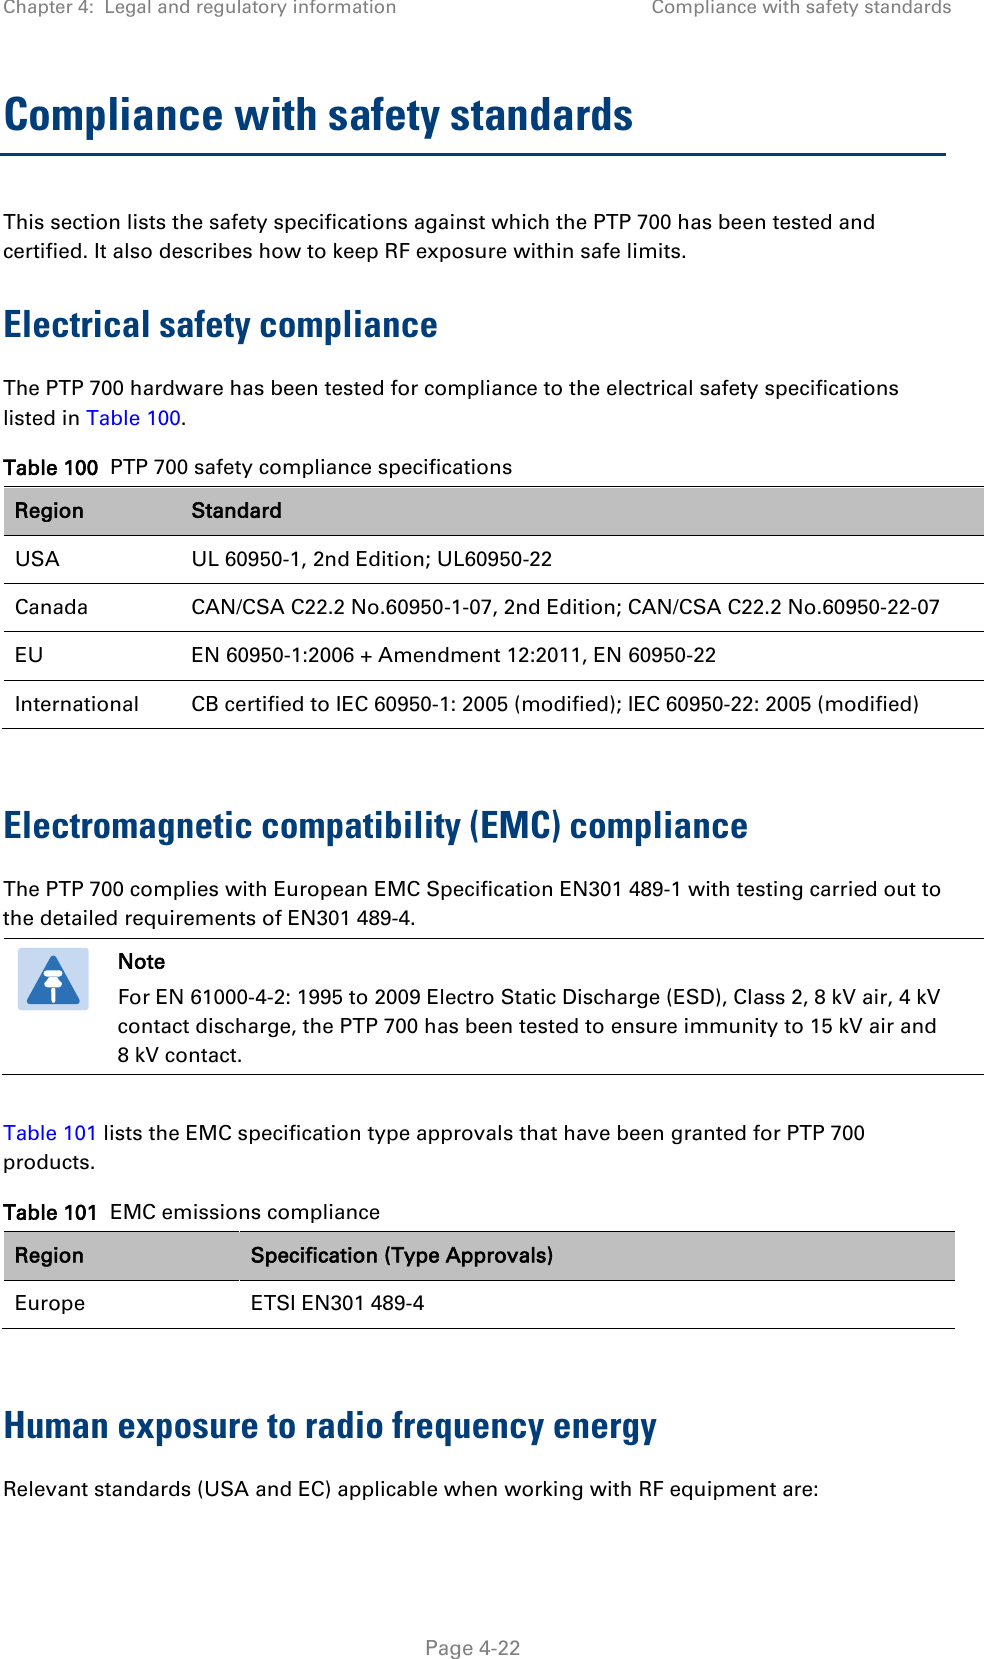 Chapter 4:  Legal and regulatory information Compliance with safety standards  Compliance with safety standards This section lists the safety specifications against which the PTP 700 has been tested and certified. It also describes how to keep RF exposure within safe limits. Electrical safety compliance  The PTP 700 hardware has been tested for compliance to the electrical safety specifications listed in Table 100. Table 100  PTP 700 safety compliance specifications Region Standard USA UL 60950-1, 2nd Edition; UL60950-22 Canada CAN/CSA C22.2 No.60950-1-07, 2nd Edition; CAN/CSA C22.2 No.60950-22-07 EU EN 60950-1:2006 + Amendment 12:2011, EN 60950-22 International CB certified to IEC 60950-1: 2005 (modified); IEC 60950-22: 2005 (modified)  Electromagnetic compatibility (EMC) compliance The PTP 700 complies with European EMC Specification EN301 489-1 with testing carried out to the detailed requirements of EN301 489-4.   Note For EN 61000-4-2: 1995 to 2009 Electro Static Discharge (ESD), Class 2, 8 kV air, 4 kV contact discharge, the PTP 700 has been tested to ensure immunity to 15 kV air and 8 kV contact.  Table 101 lists the EMC specification type approvals that have been granted for PTP 700 products. Table 101  EMC emissions compliance Region Specification (Type Approvals) Europe ETSI EN301 489-4  Human exposure to radio frequency energy Relevant standards (USA and EC) applicable when working with RF equipment are:  Page 4-22 